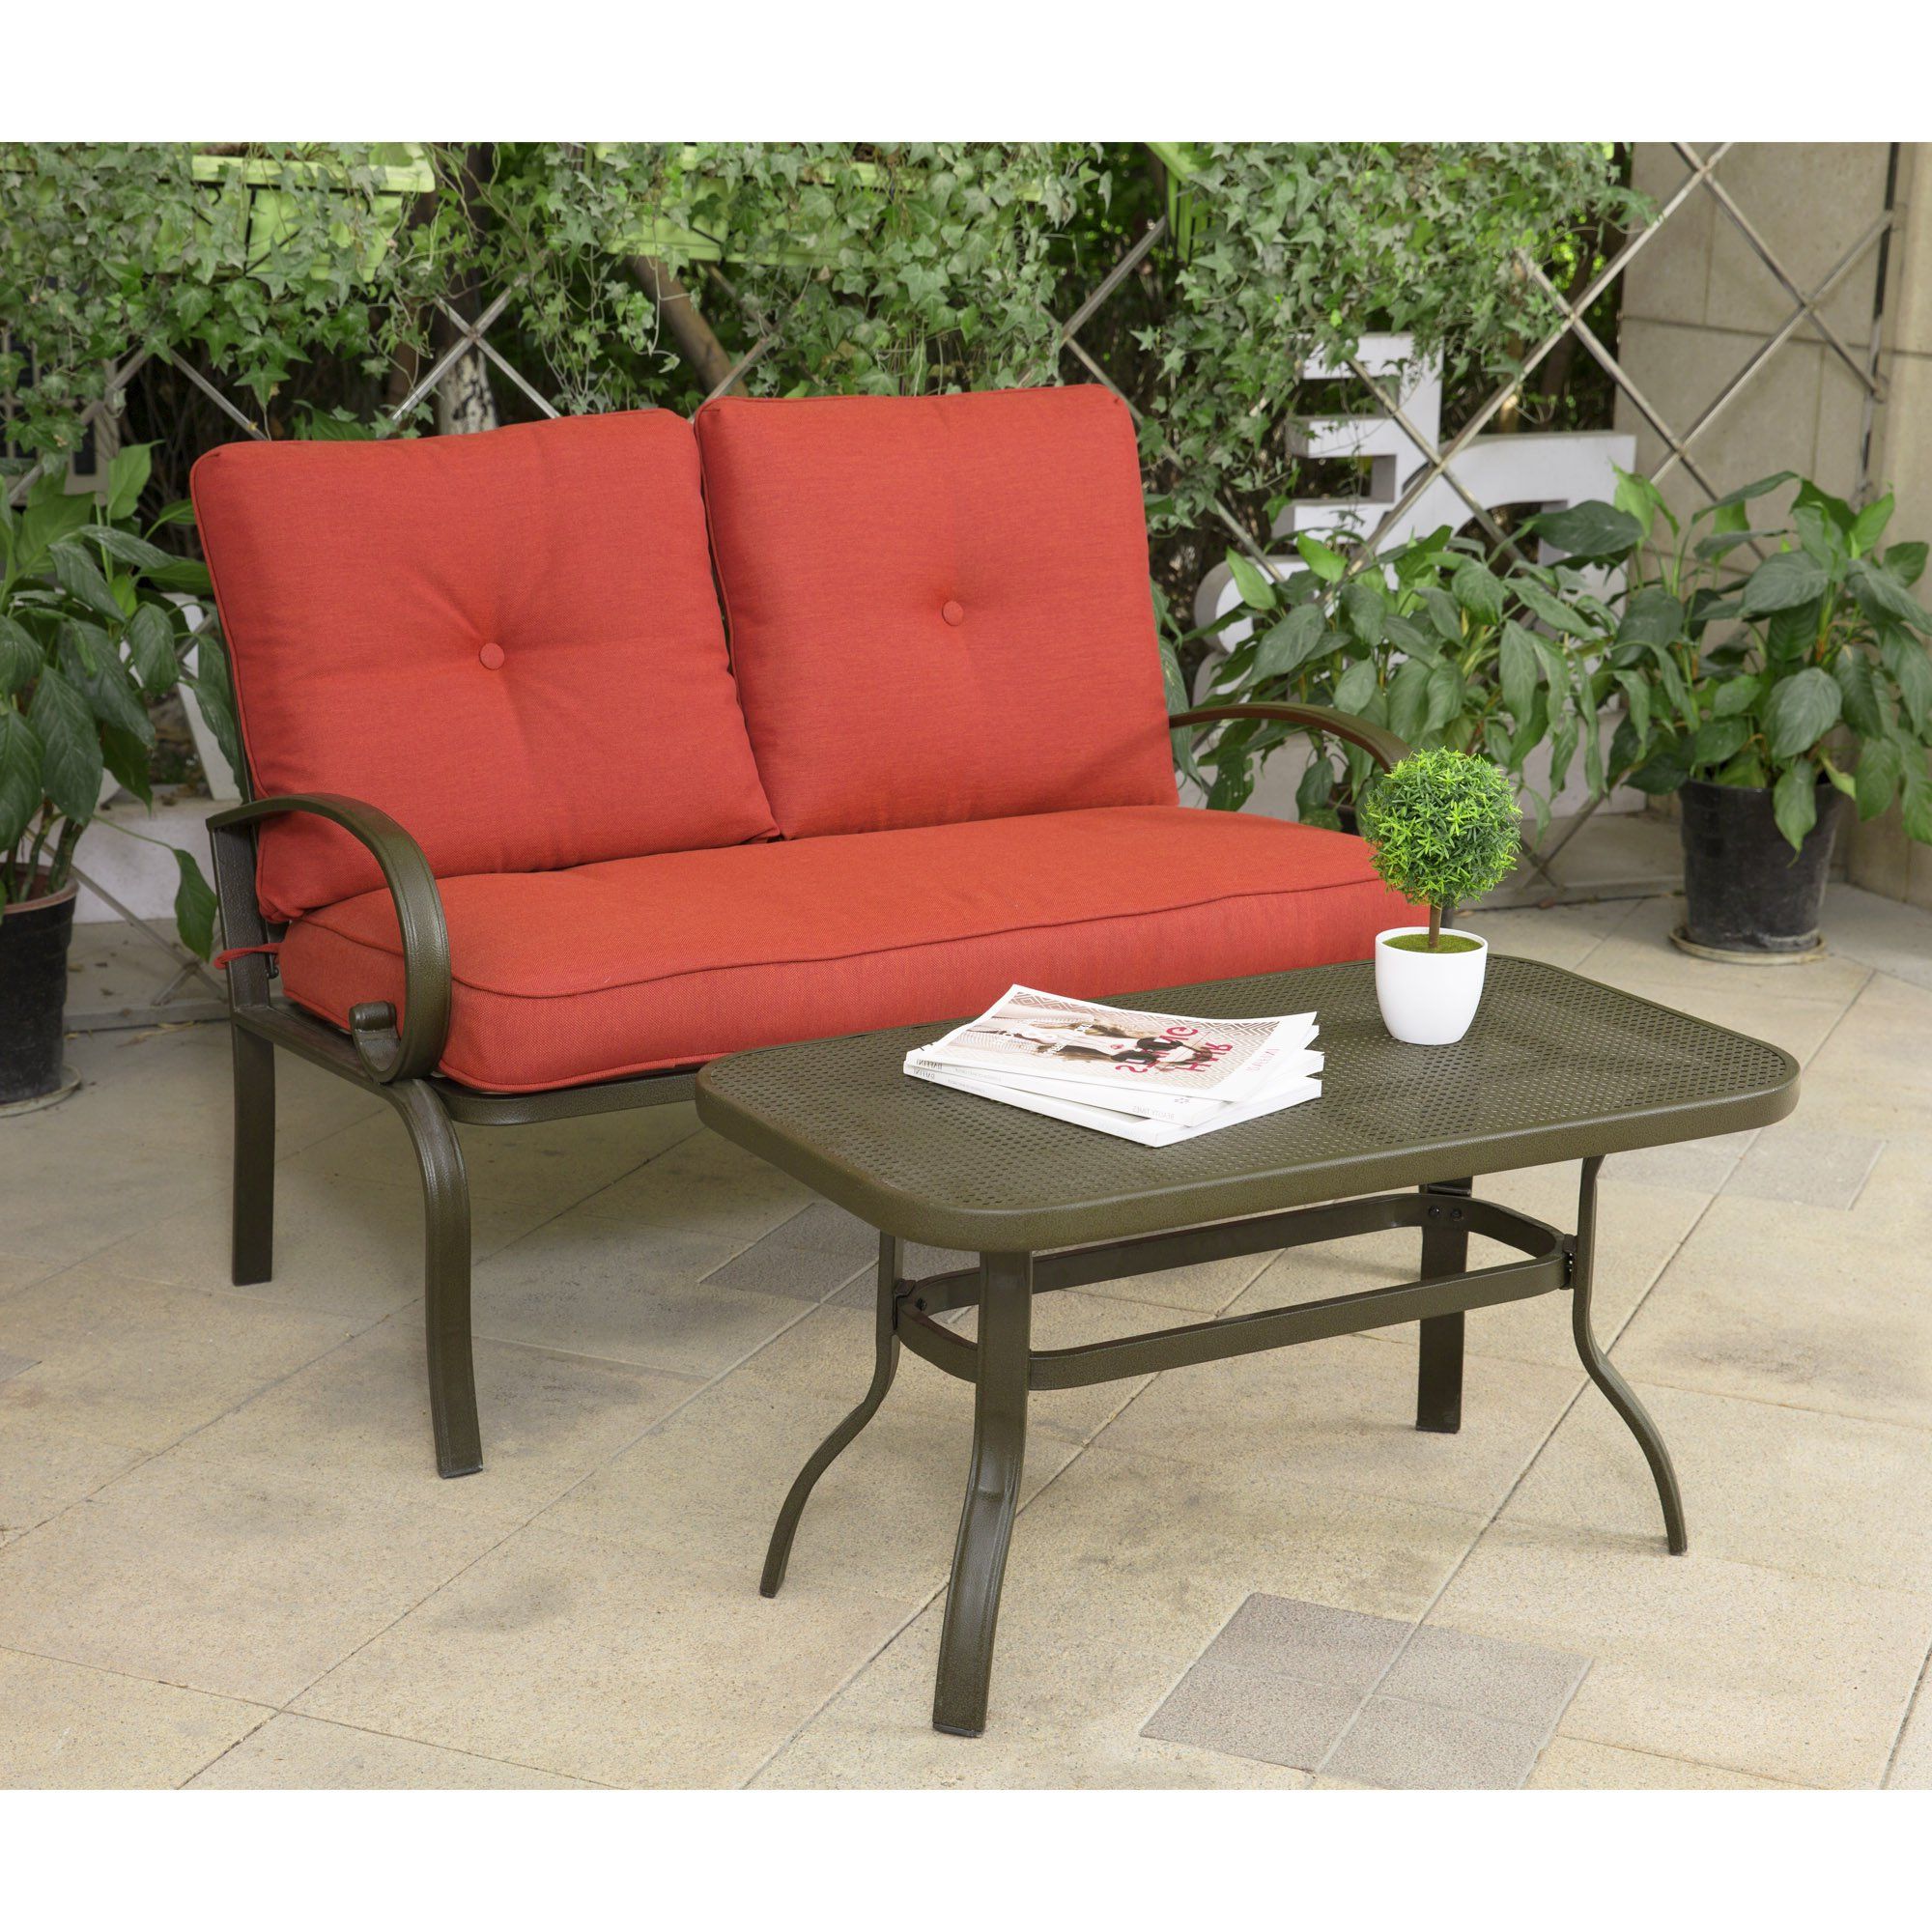 Cheap Patio Loveseat Set, Find Patio Loveseat Set Deals On Line At Within Latest Red Loveseat Outdoor Conversation Sets (View 14 of 15)